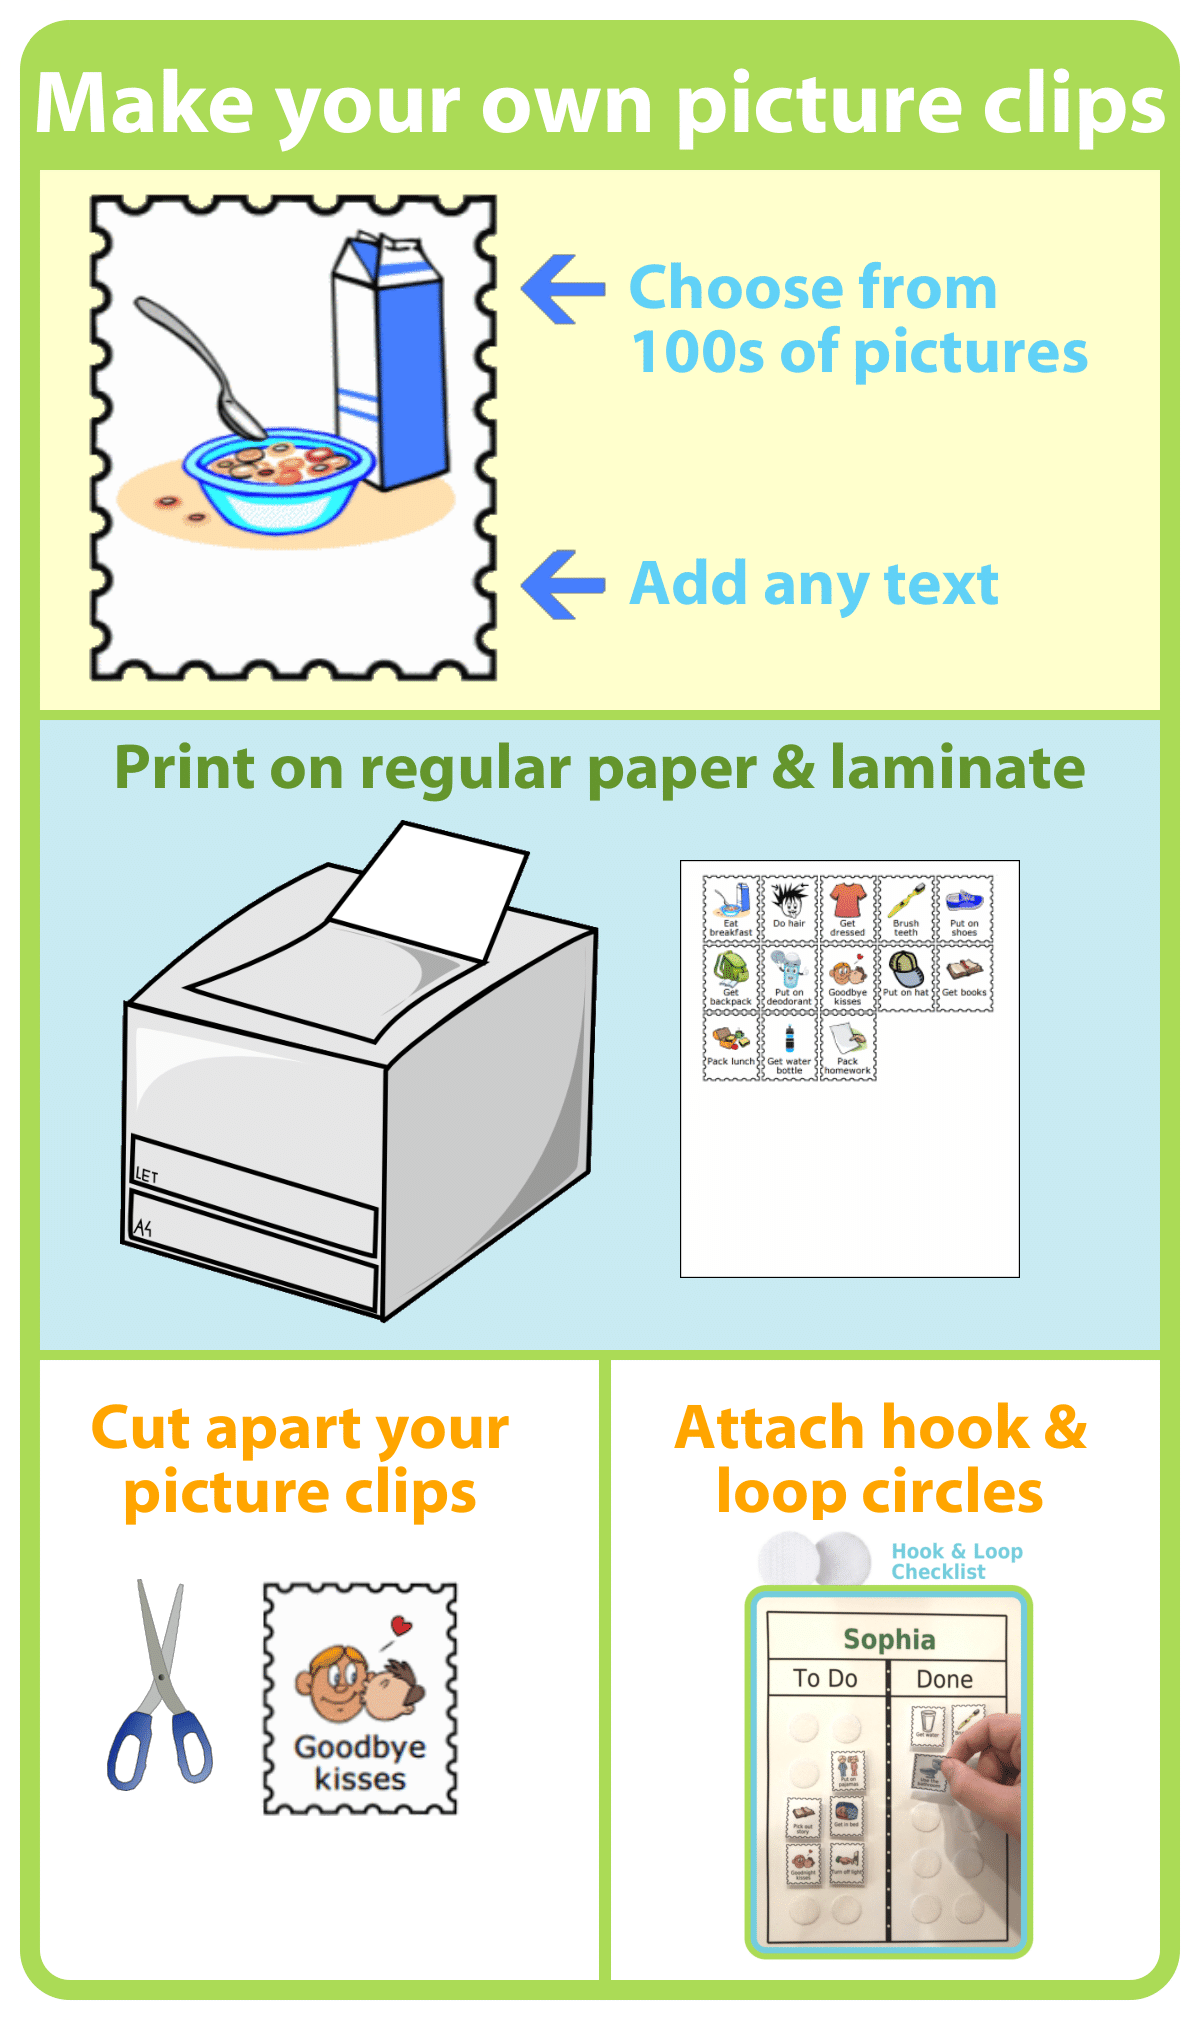 Print Your Own Picture Clips